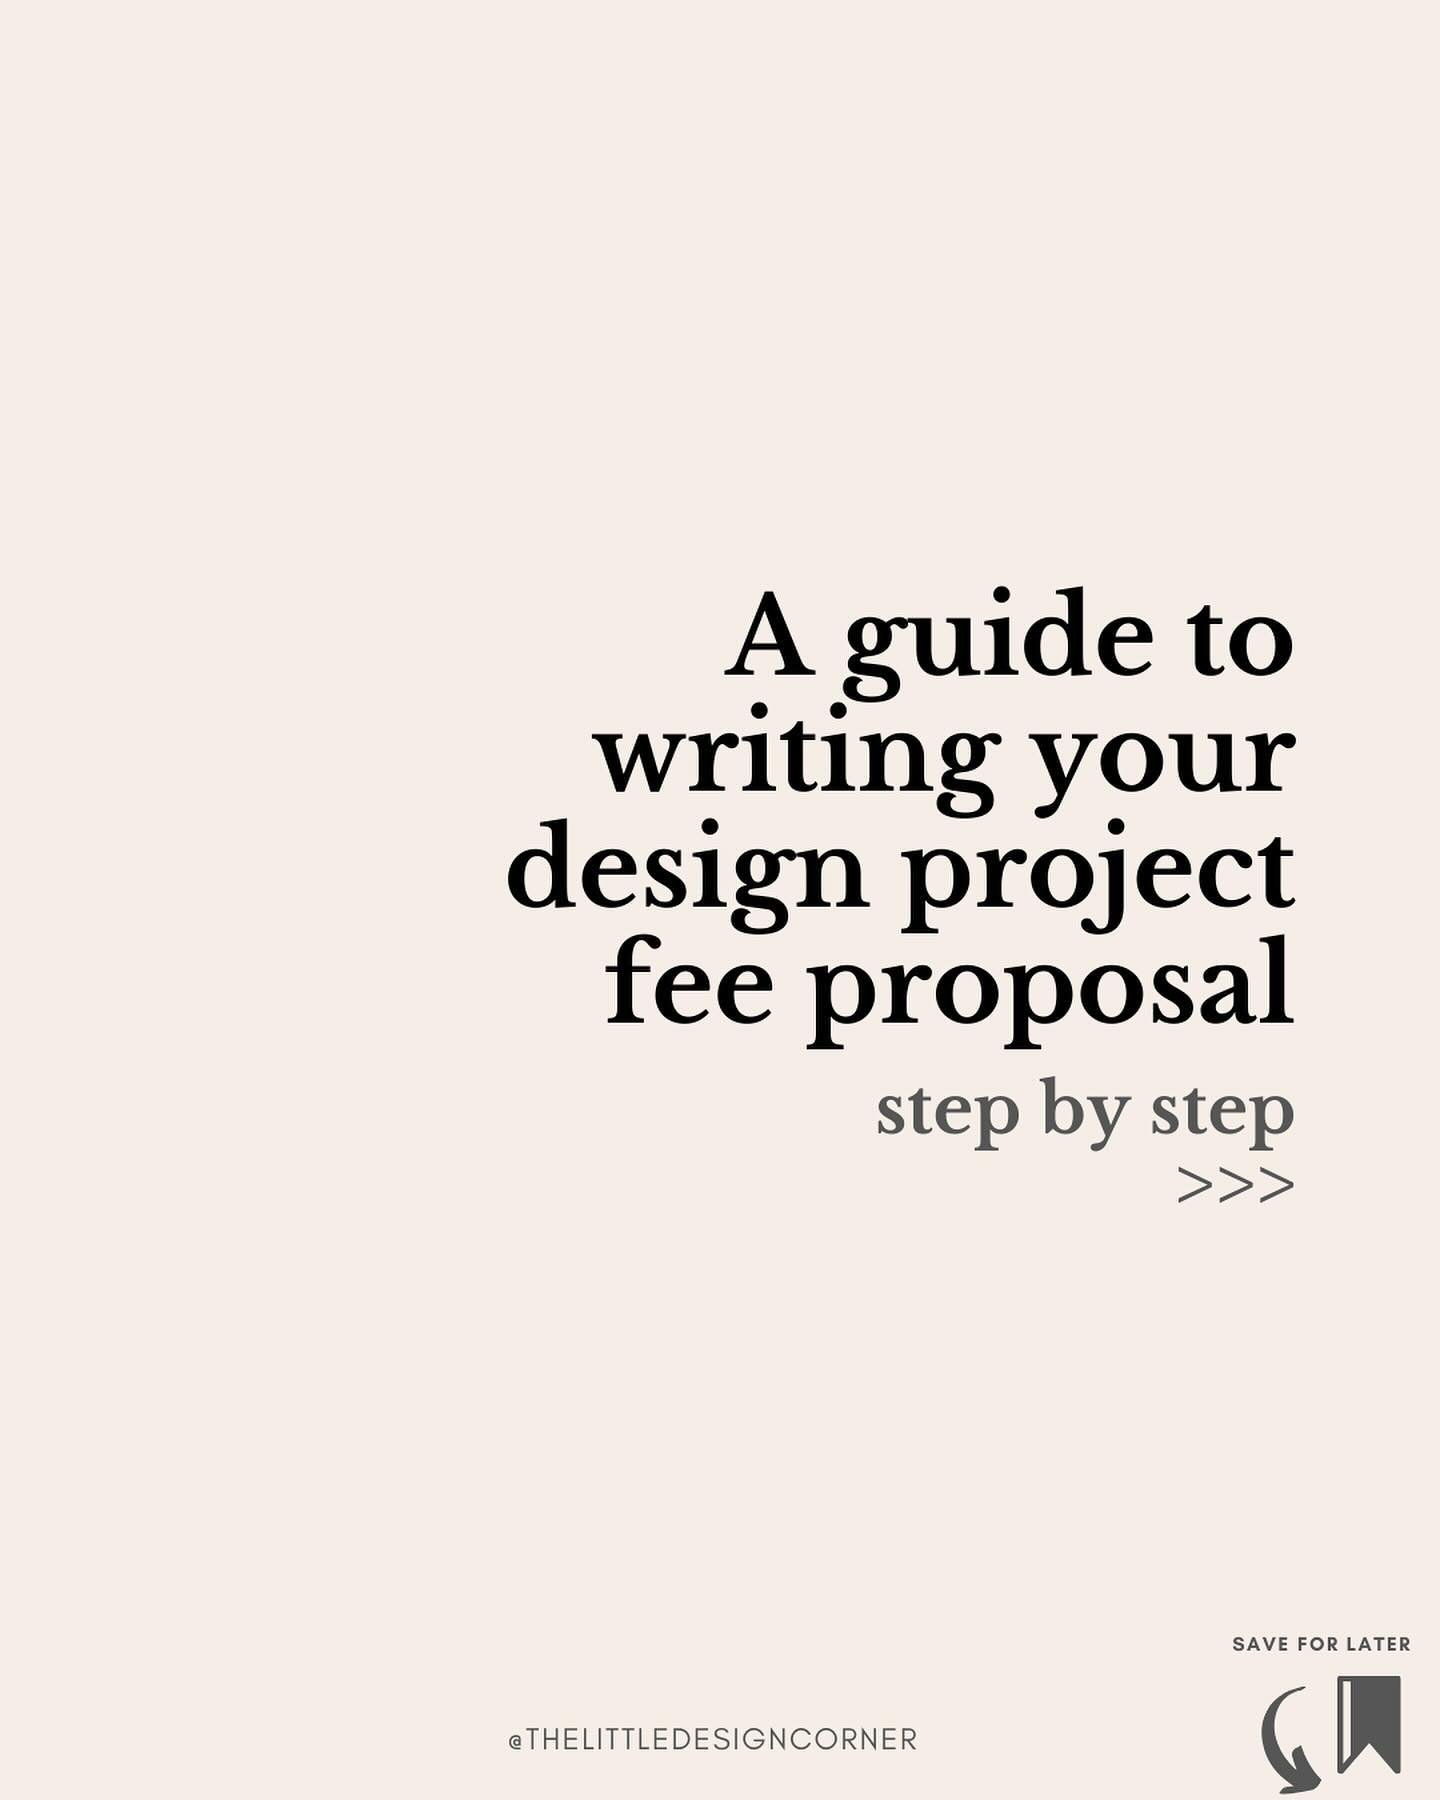 Start winning more design projects 👇🏻

If you&rsquo;re tired of sending out client fee proposals only to be met with silence or rejection then try these tips for creating a highly converting proposal. [SWIPE TO READ &gt;&gt;&gt;]

And if you need m